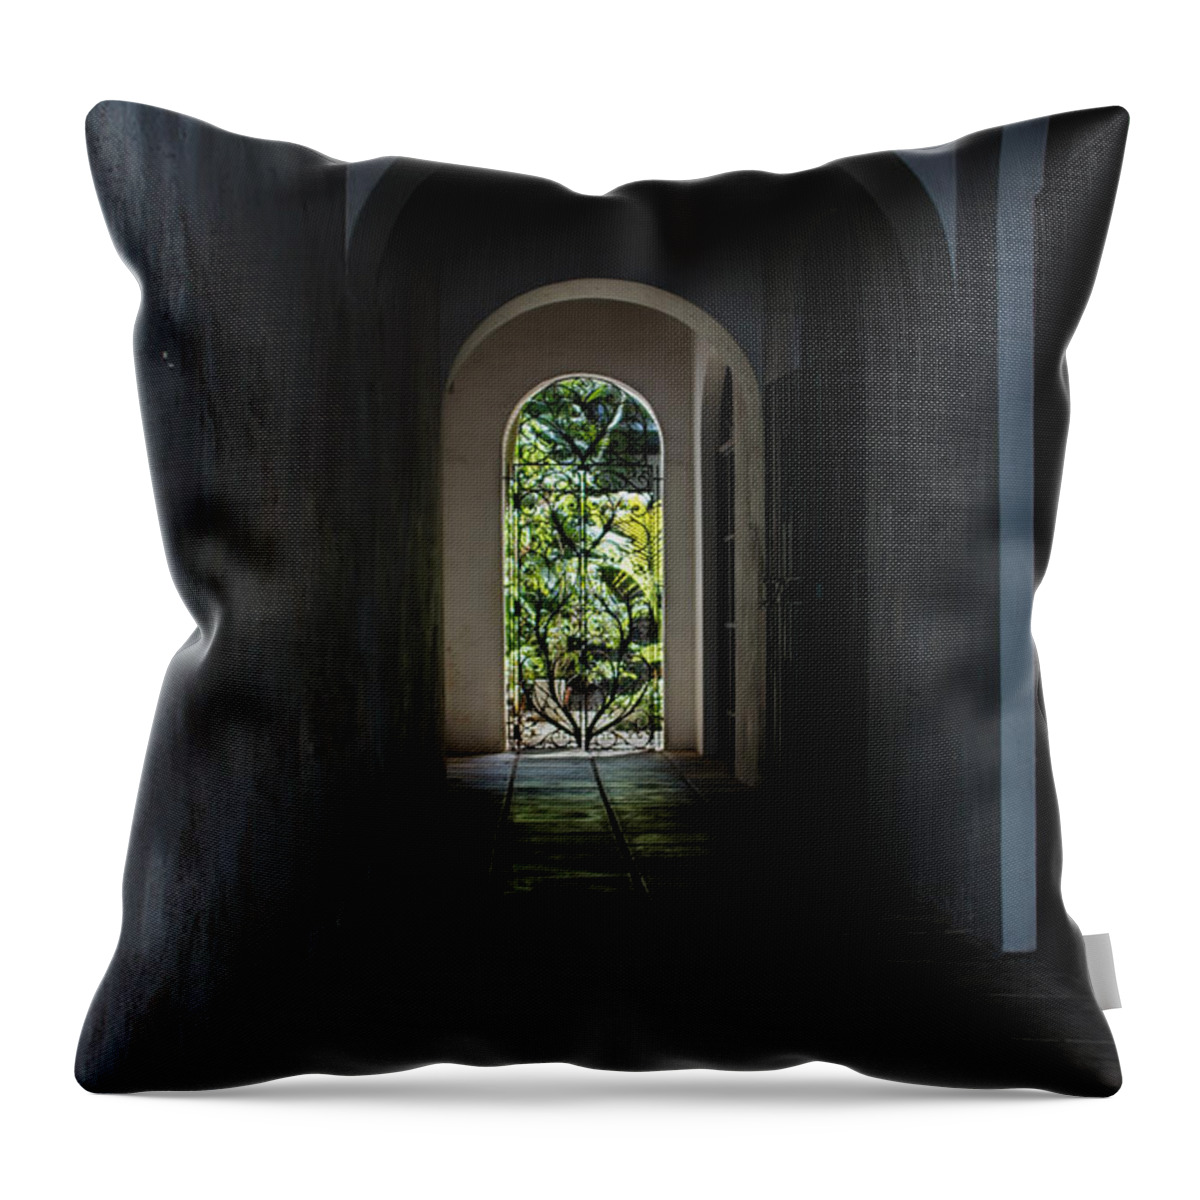 End Of The Tunnel Throw Pillow featuring the photograph The Light at the End of the Tunnel by Georgia Mizuleva